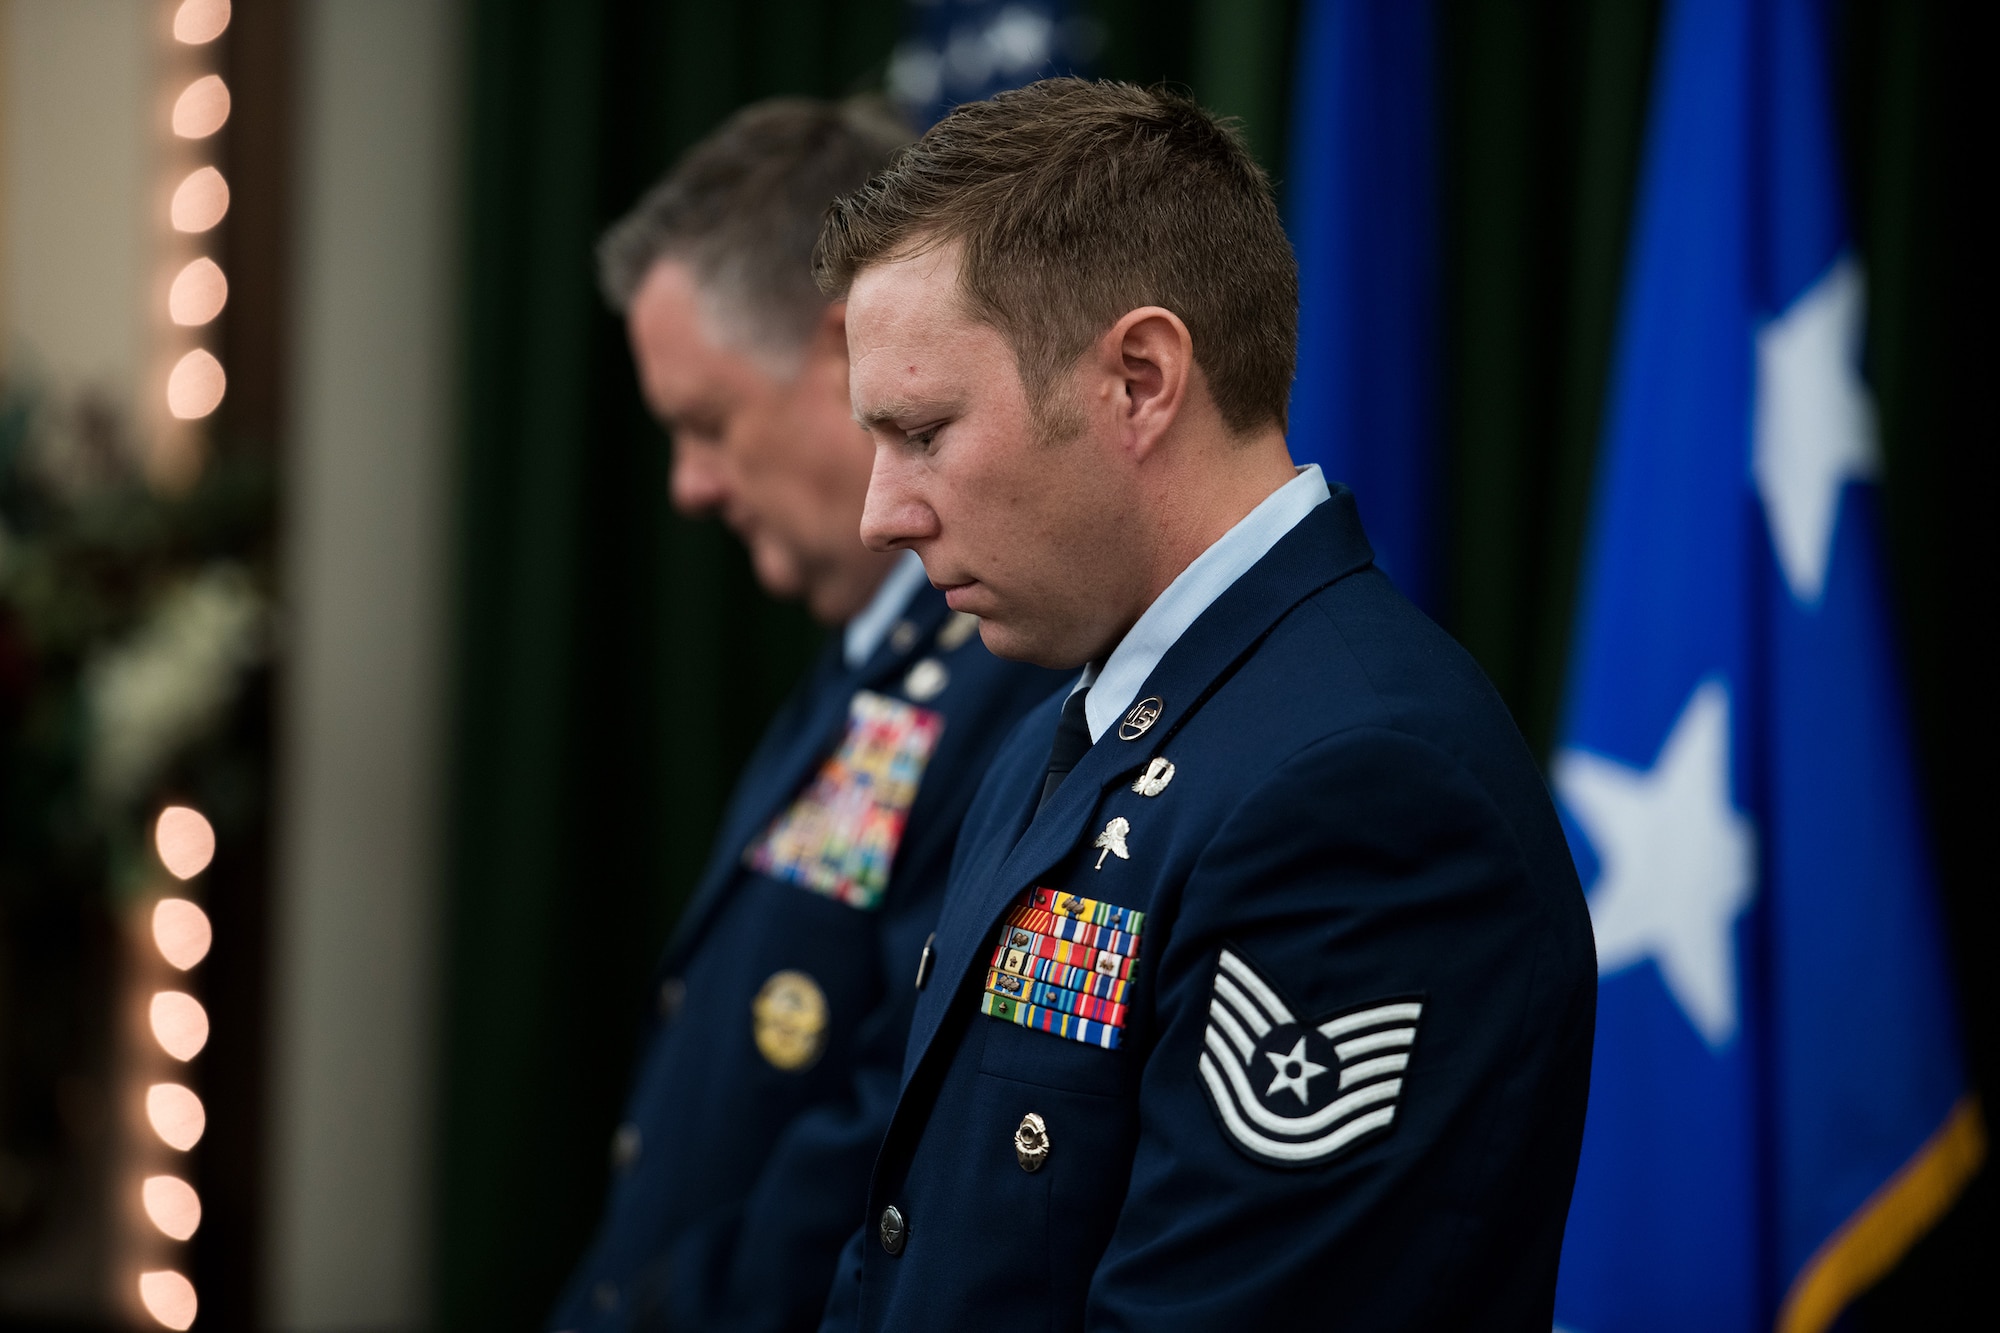 Technical Sgt. Michael Perolio was awarded the Silver Star medal at Joint Base San Antonio-Lackland on July 18.